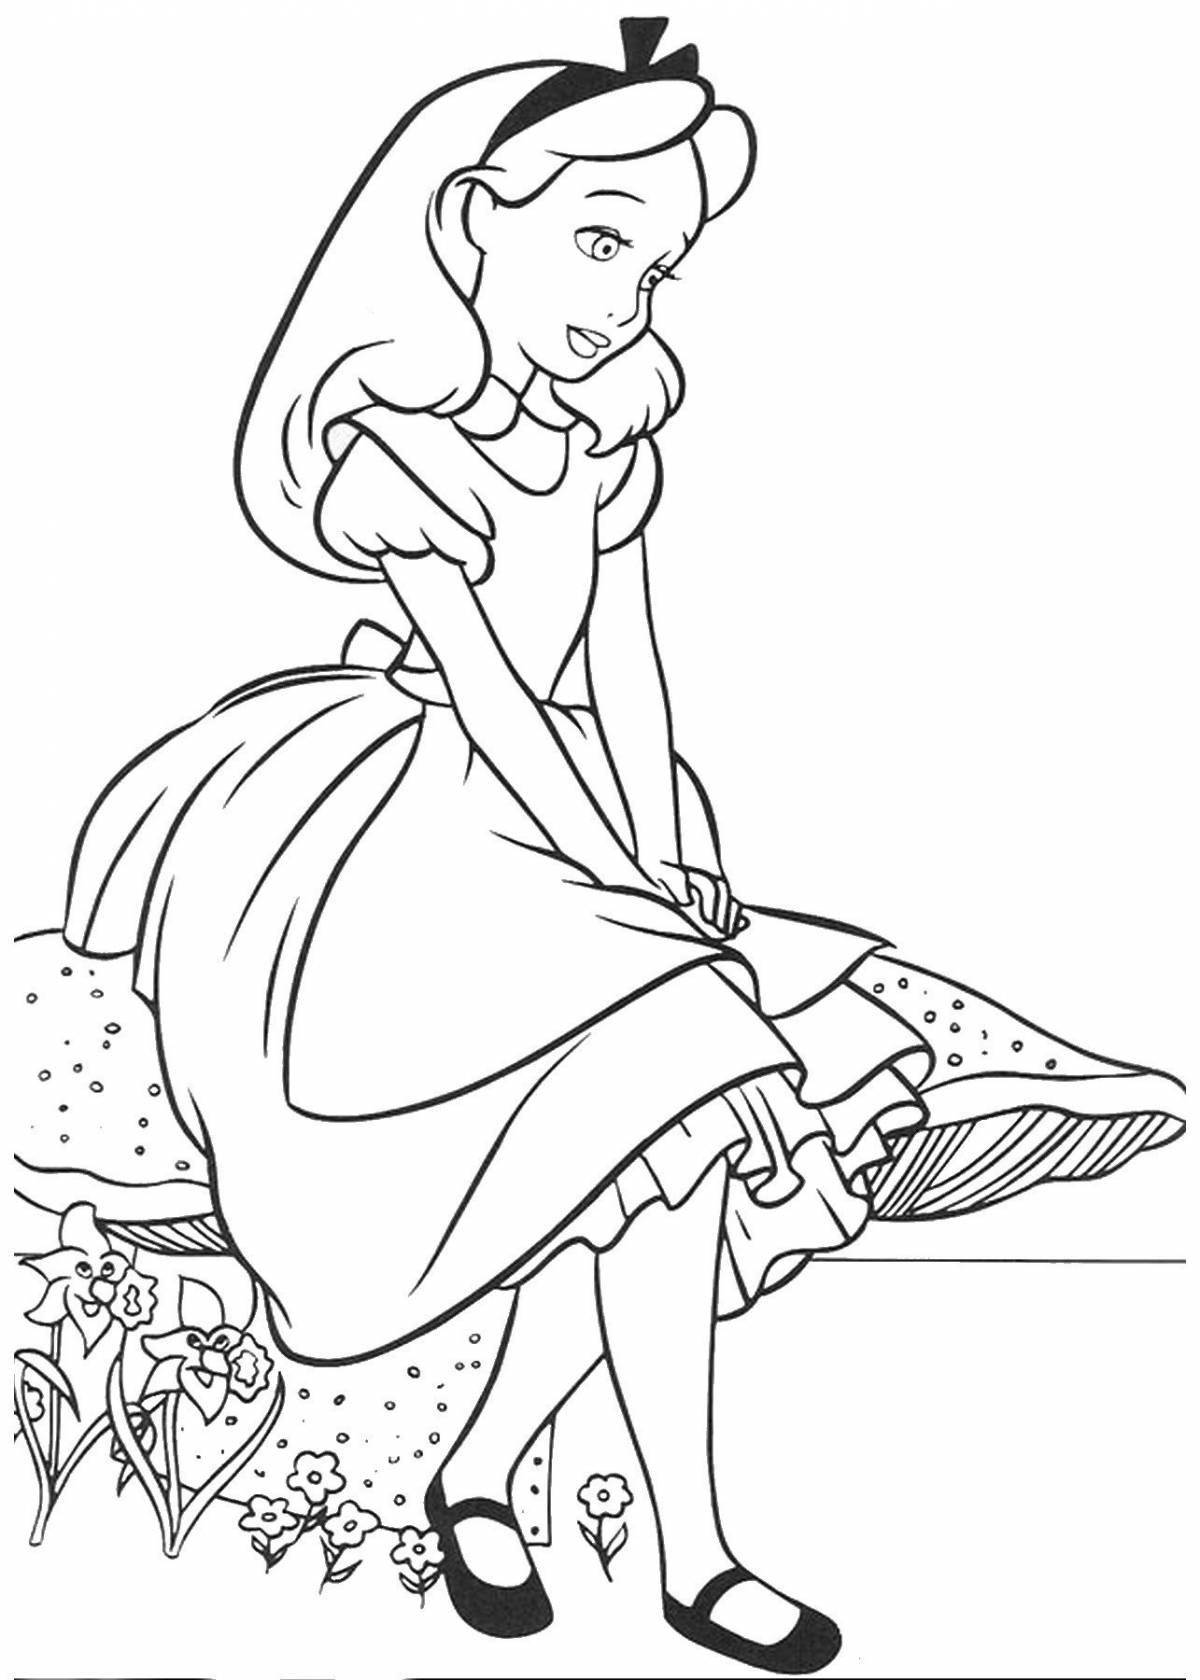 Alive Alice finds a coloring book